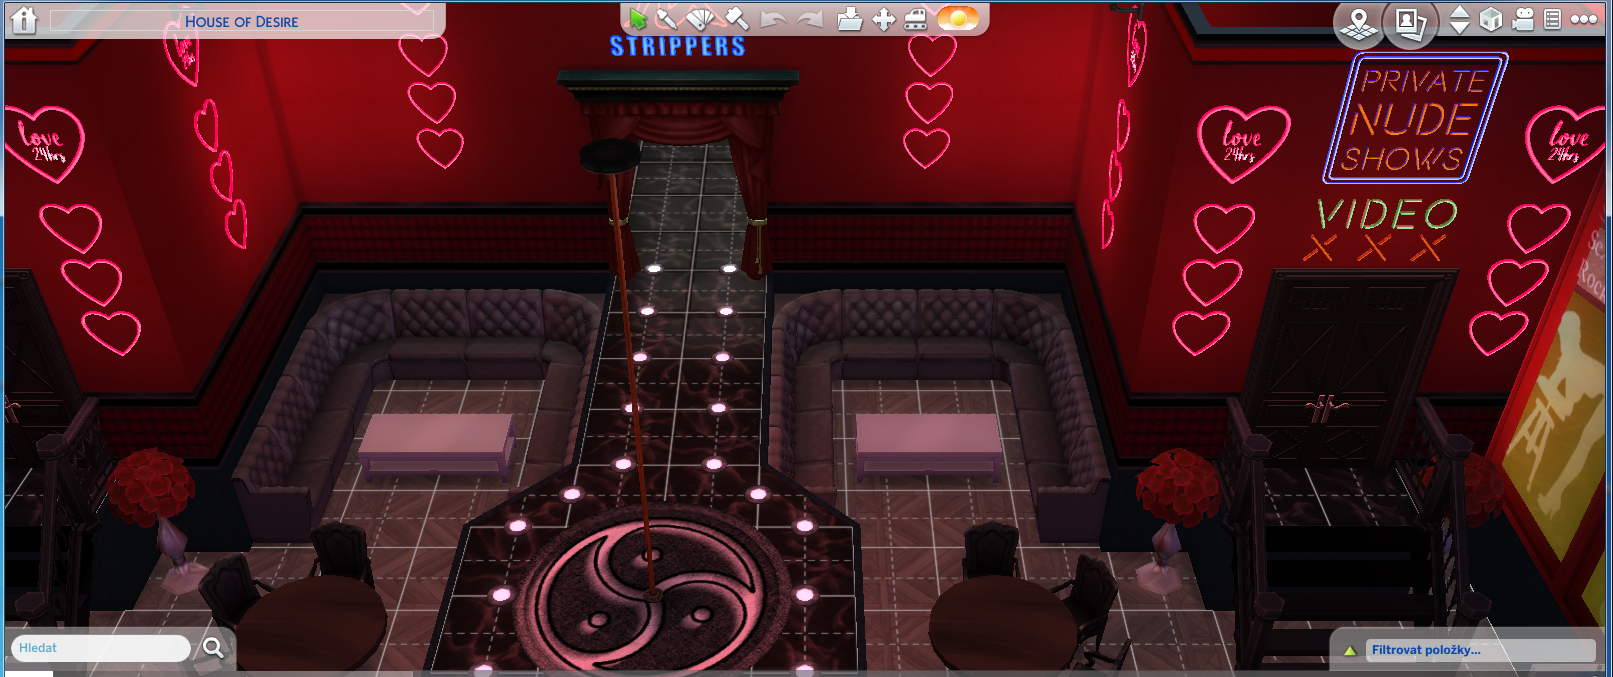 Heaven The Dungeon Mansion Stripclub Brothel Optional Dancers 0158